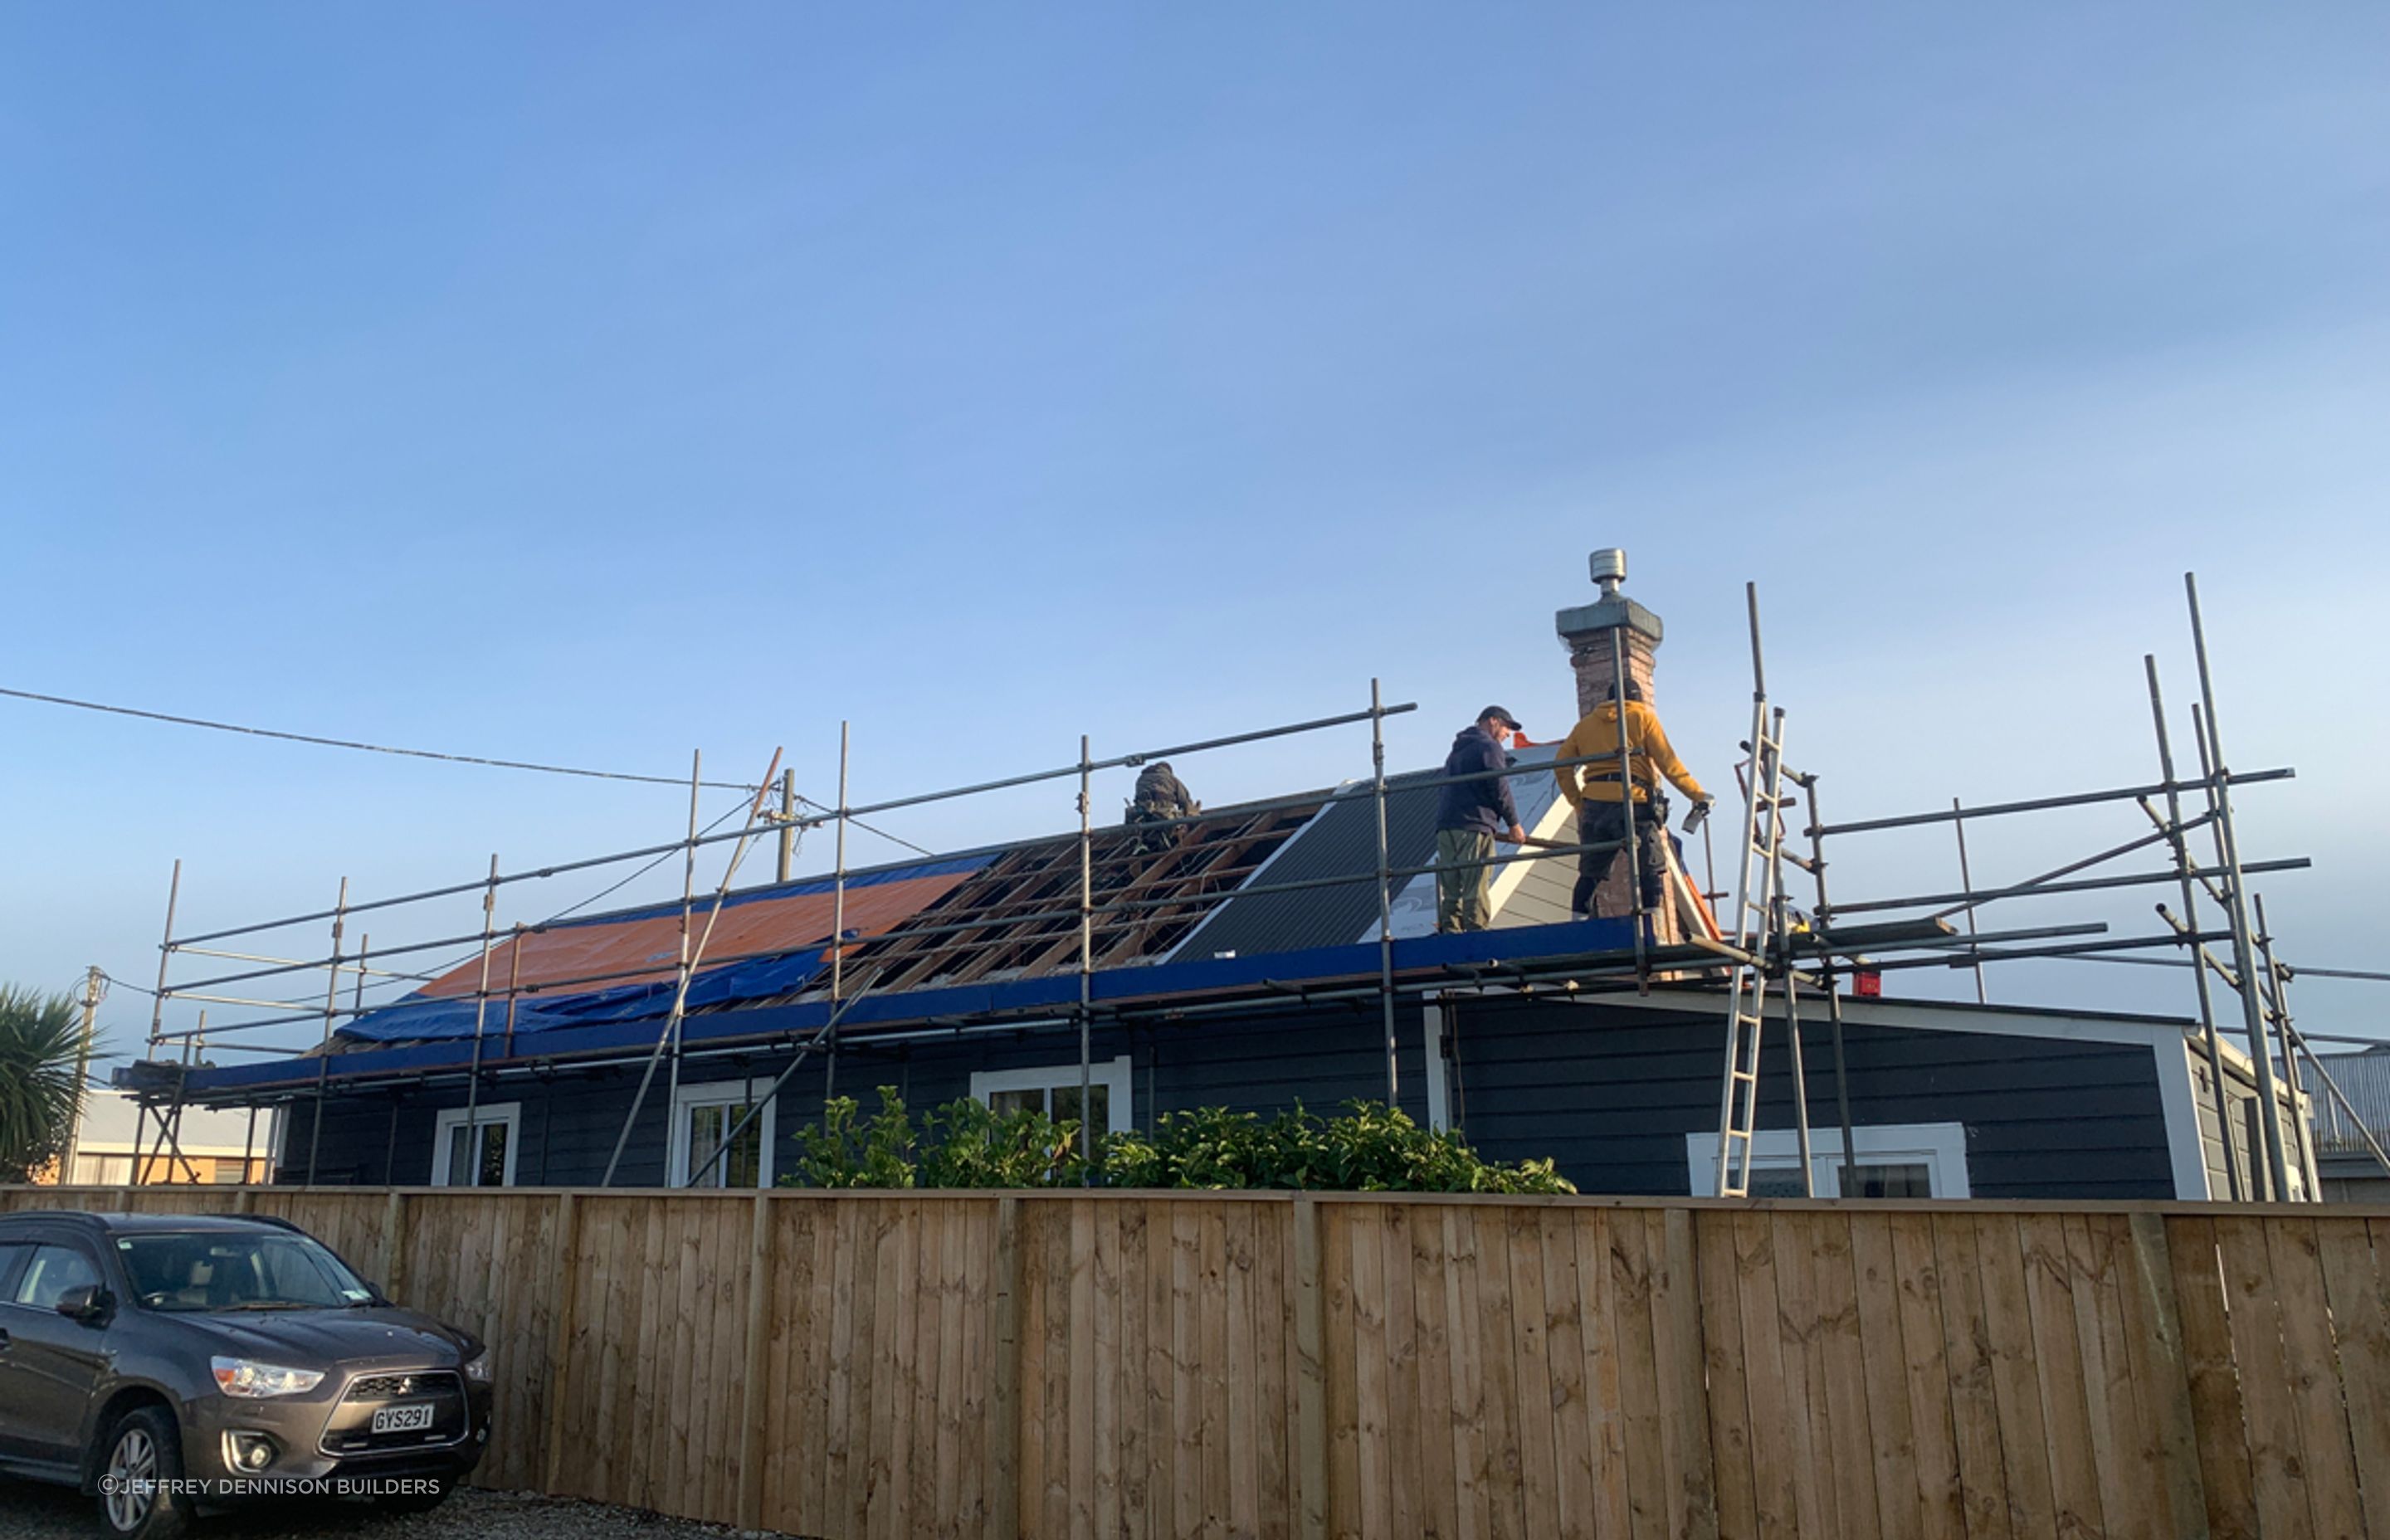 Reroofing underway, taking off the old roofing, repairing any damaged purlins and affixing new roofing underlay and sheets of long run roofing.